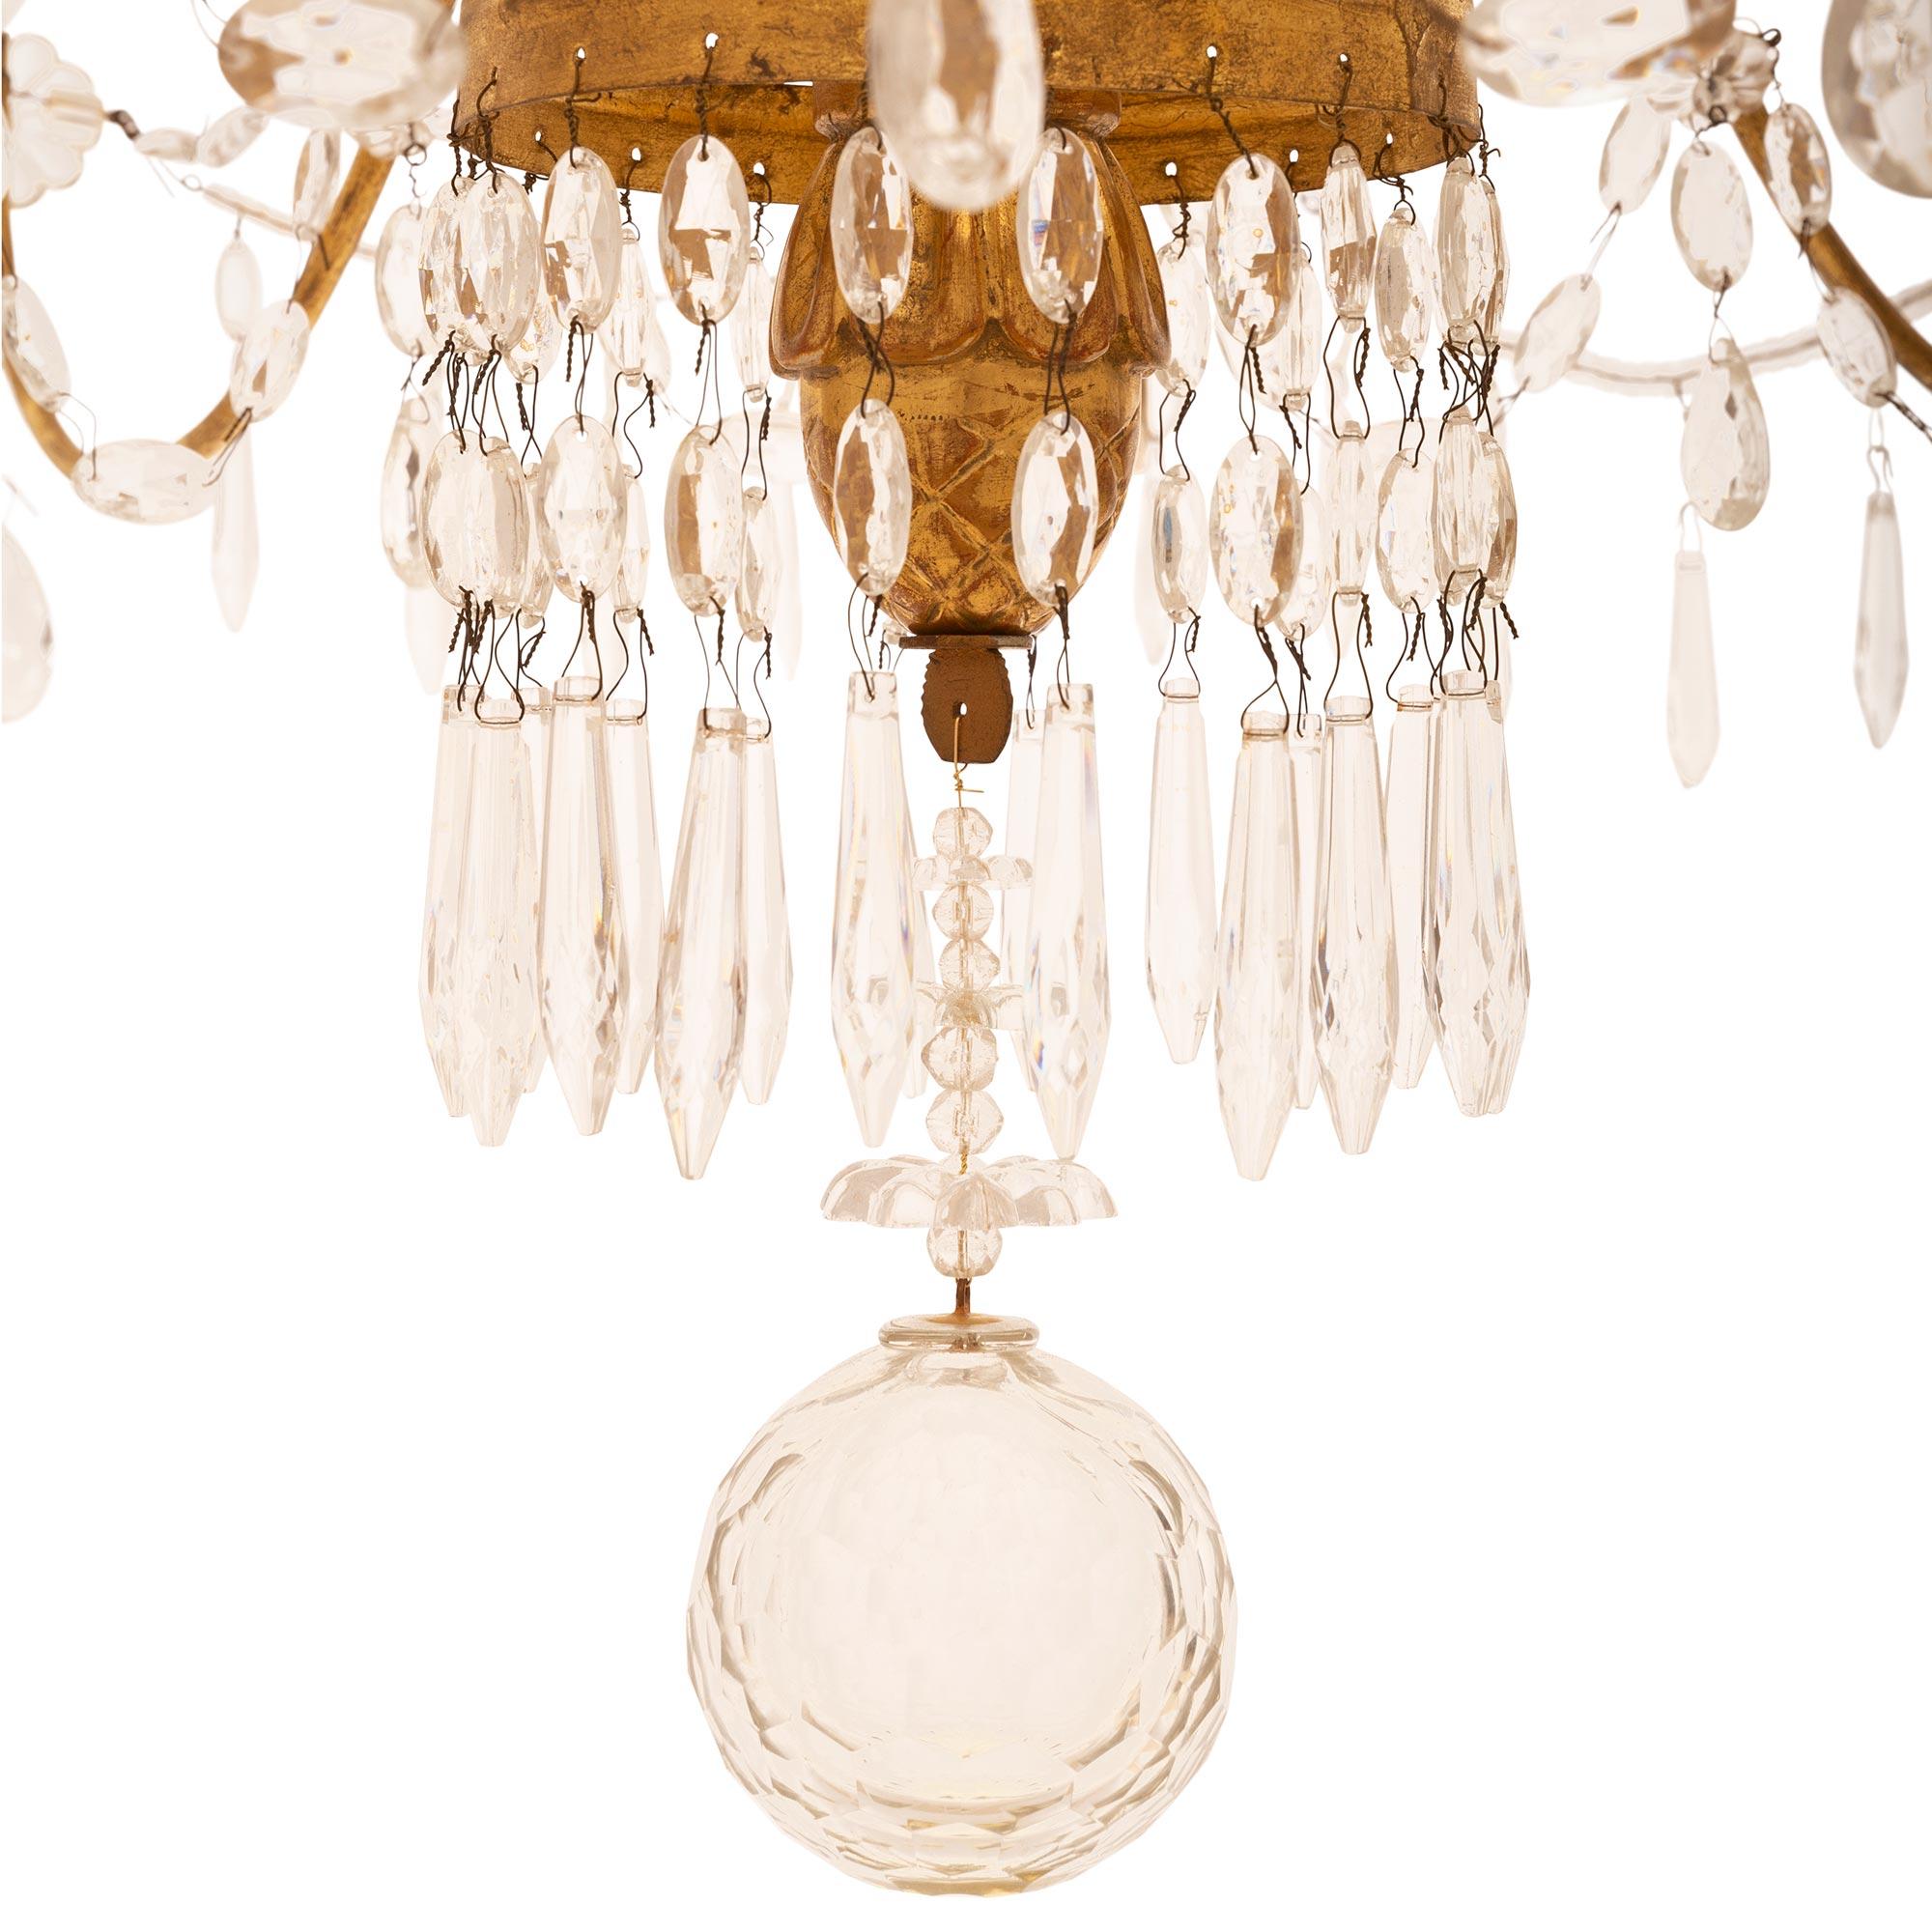 Italian 19th Century Giltwood and Gold Leaf on Metal Chandelier For Sale 2